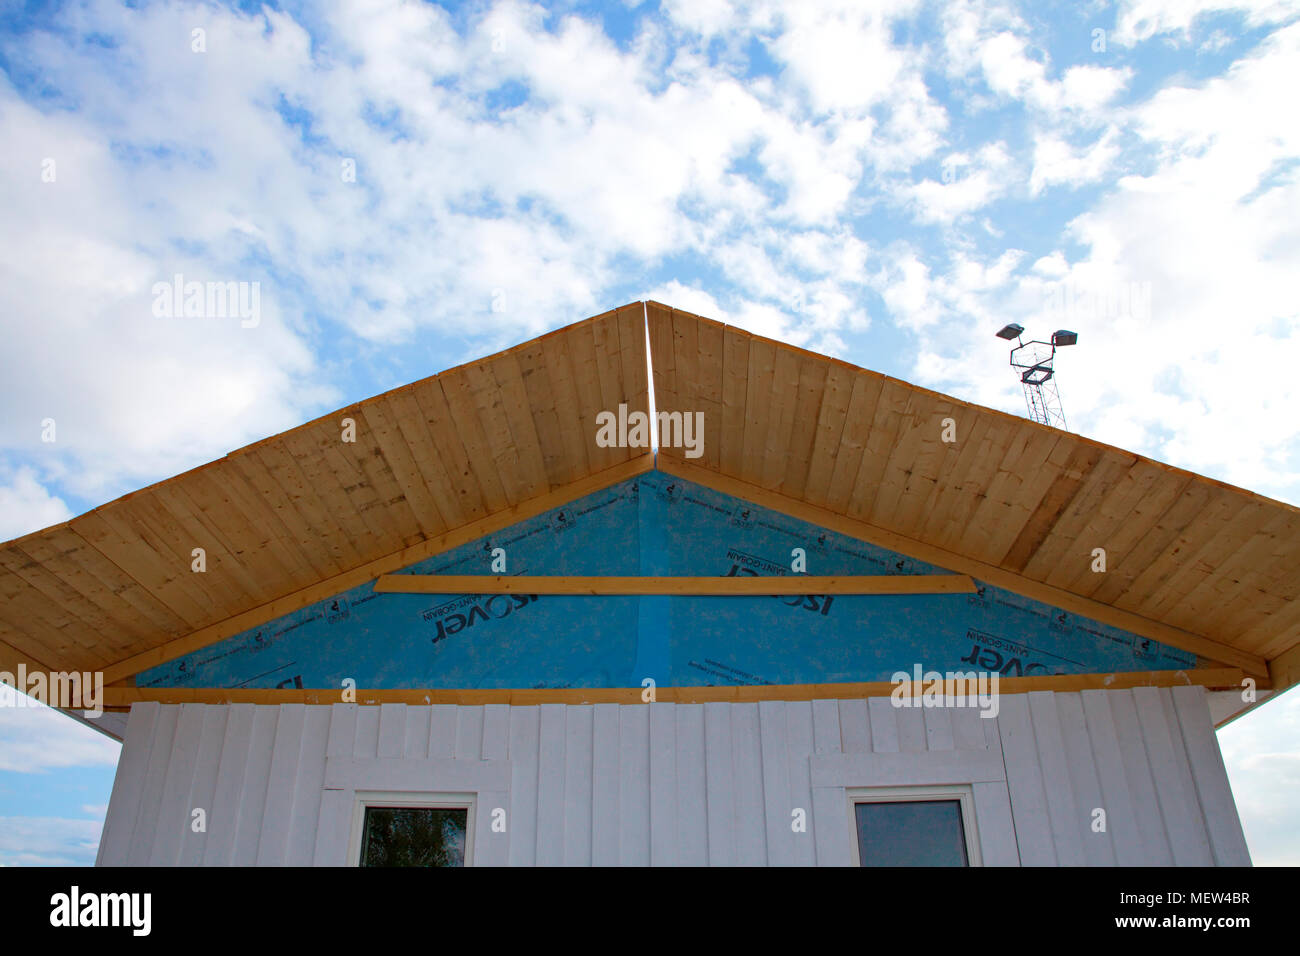 A small wooden house is under construction, the blue insulation sheeting is visible under the roof. Stock Photo